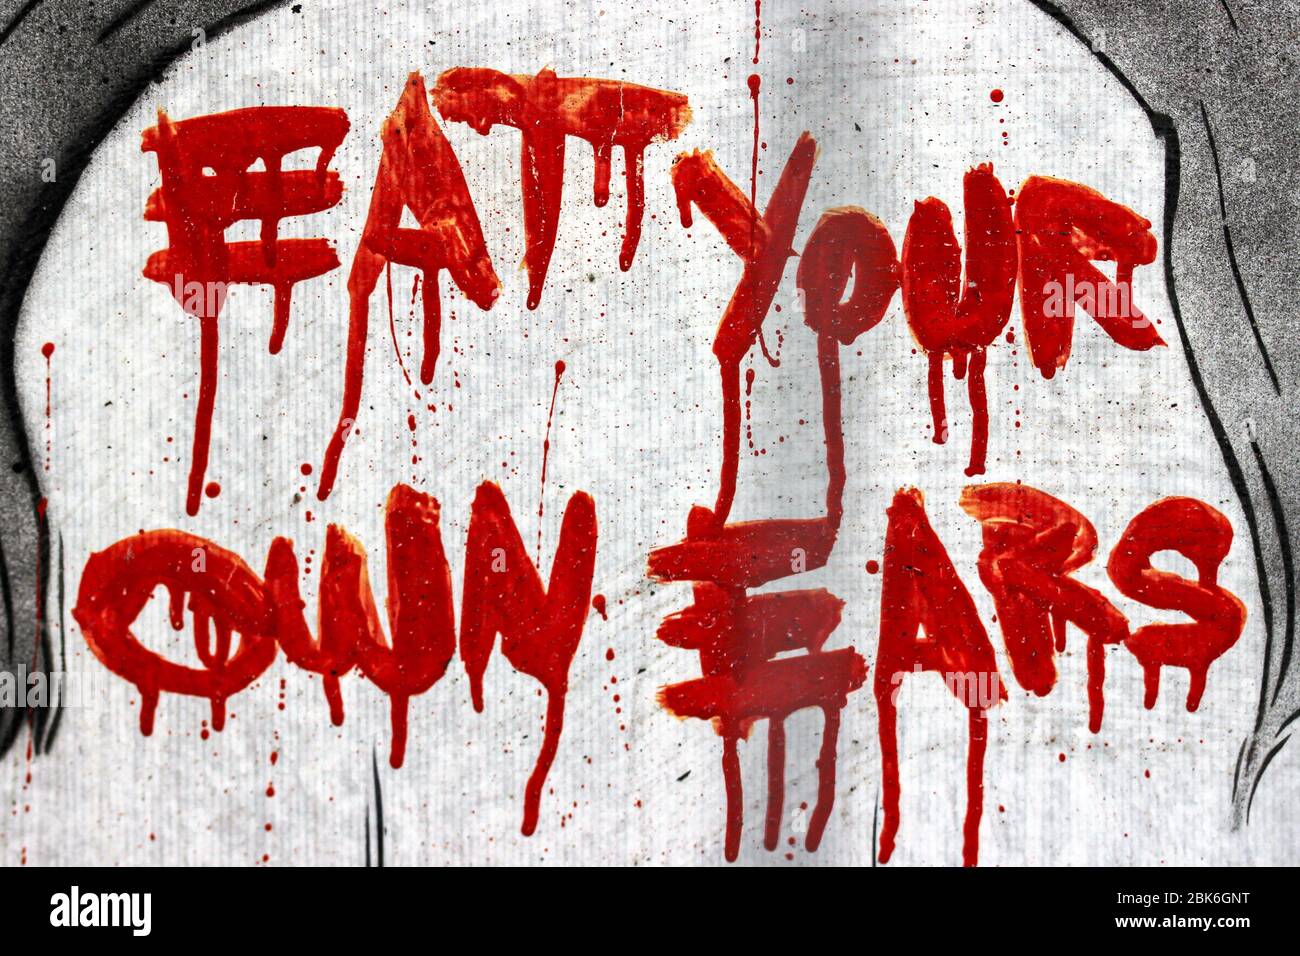 Eat your own ears - written with red paint on the wall in Amsterdam, Netherlands Stock Photo